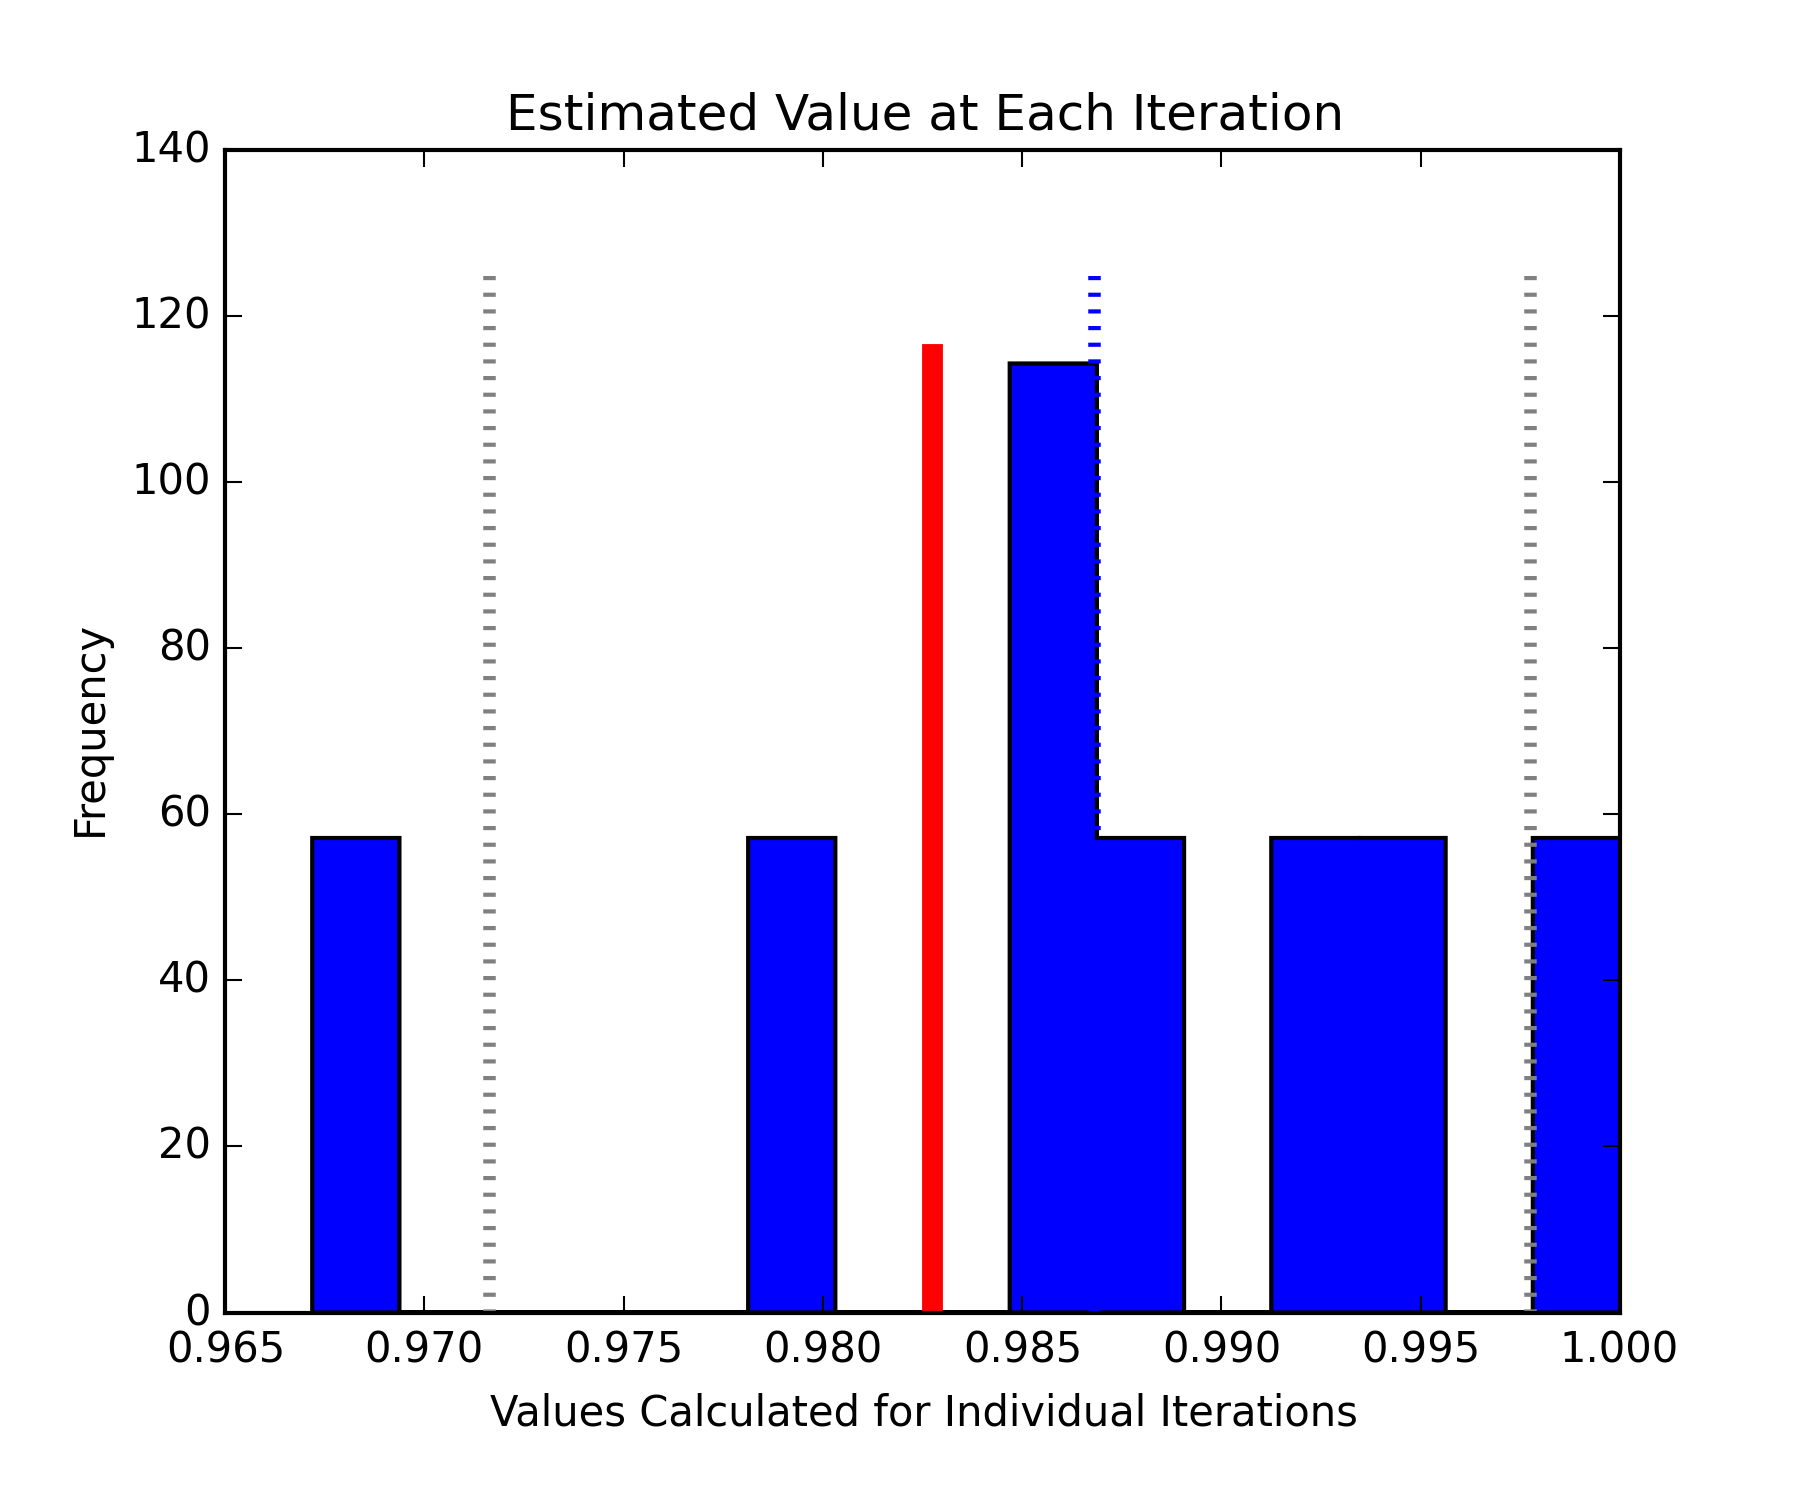 Estimated Value of Each Iteration